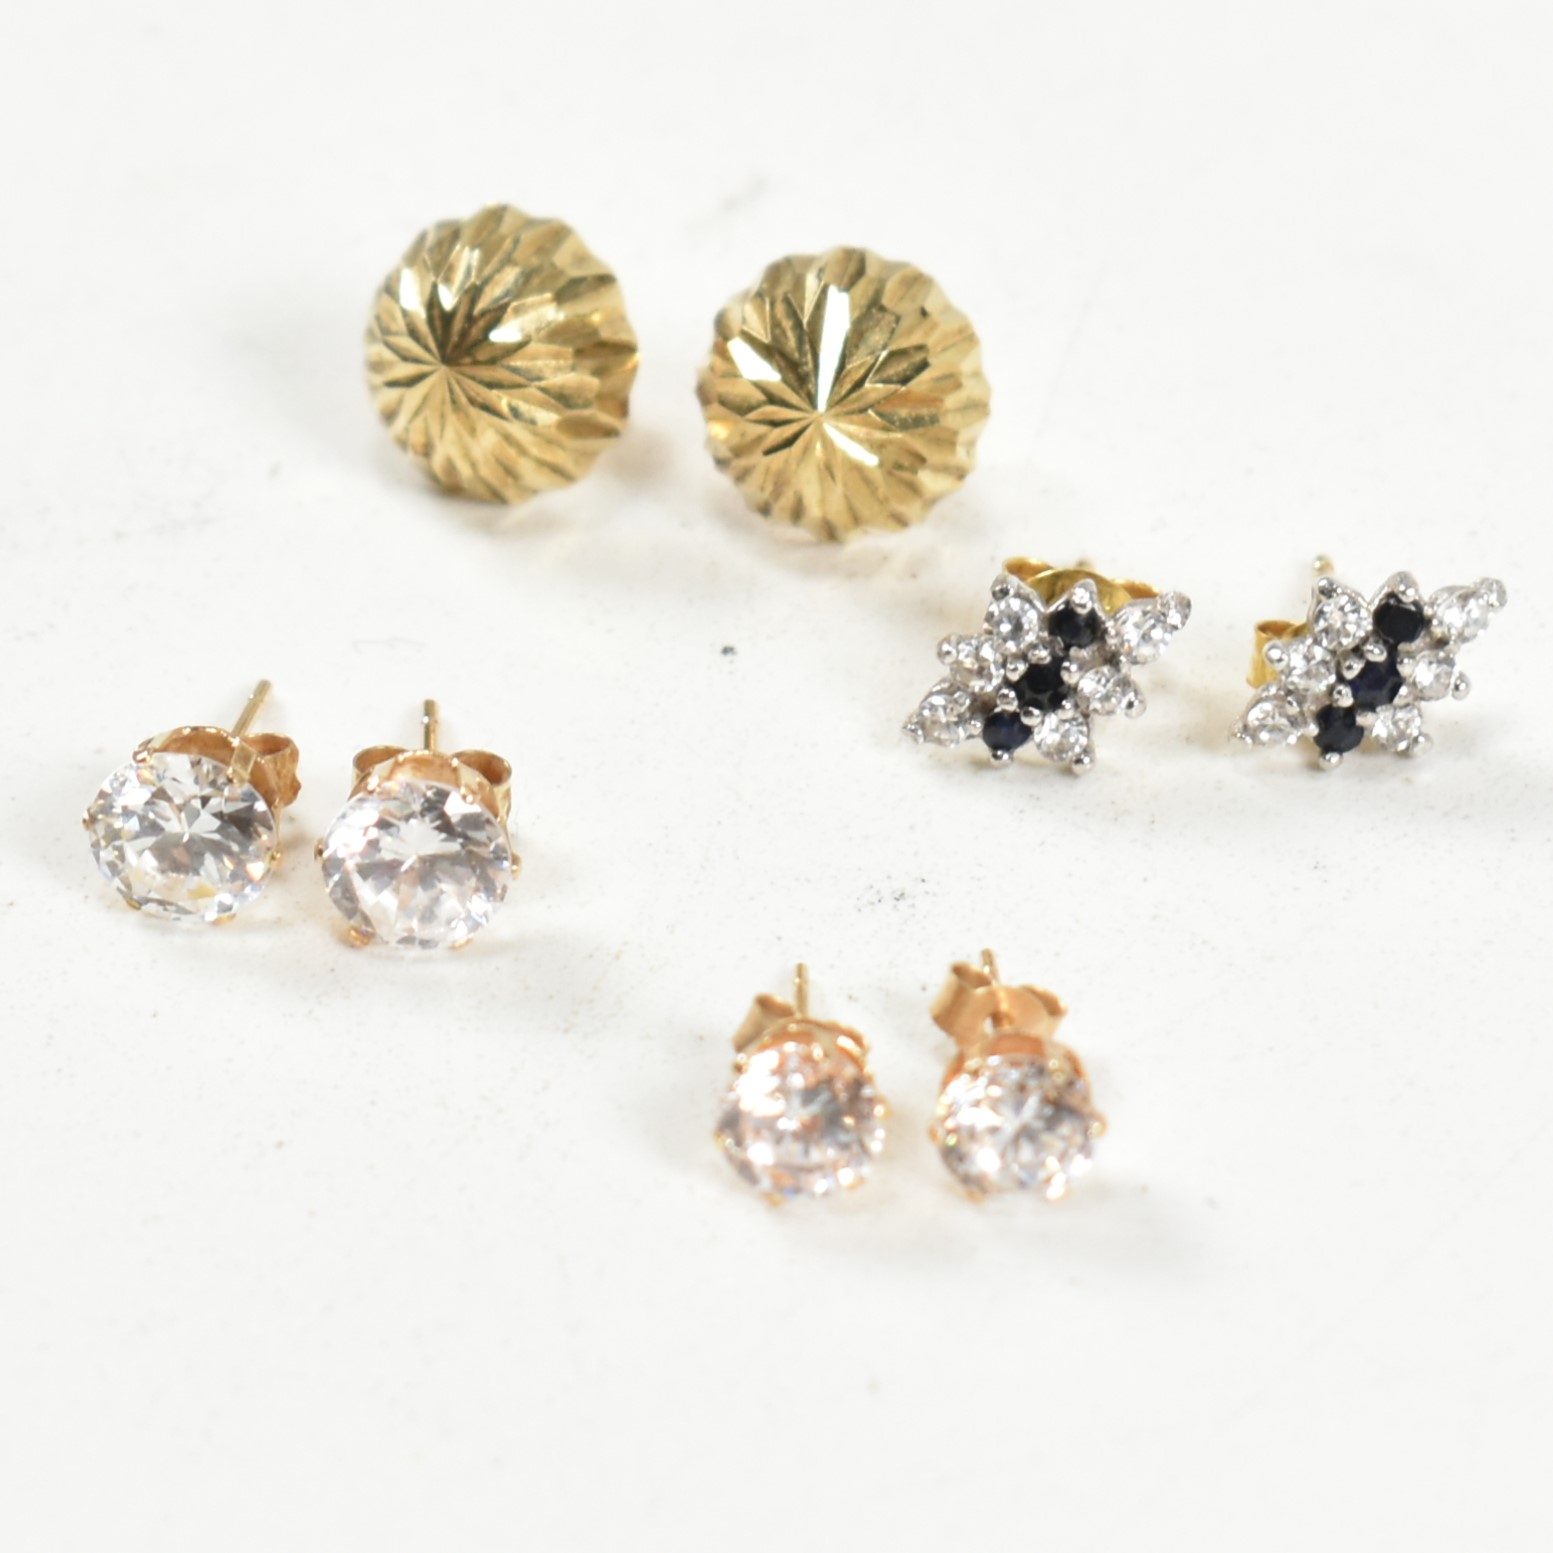 FOUR PAIRS OF 9CT GOLD & GEM SET STUD EARRINGS